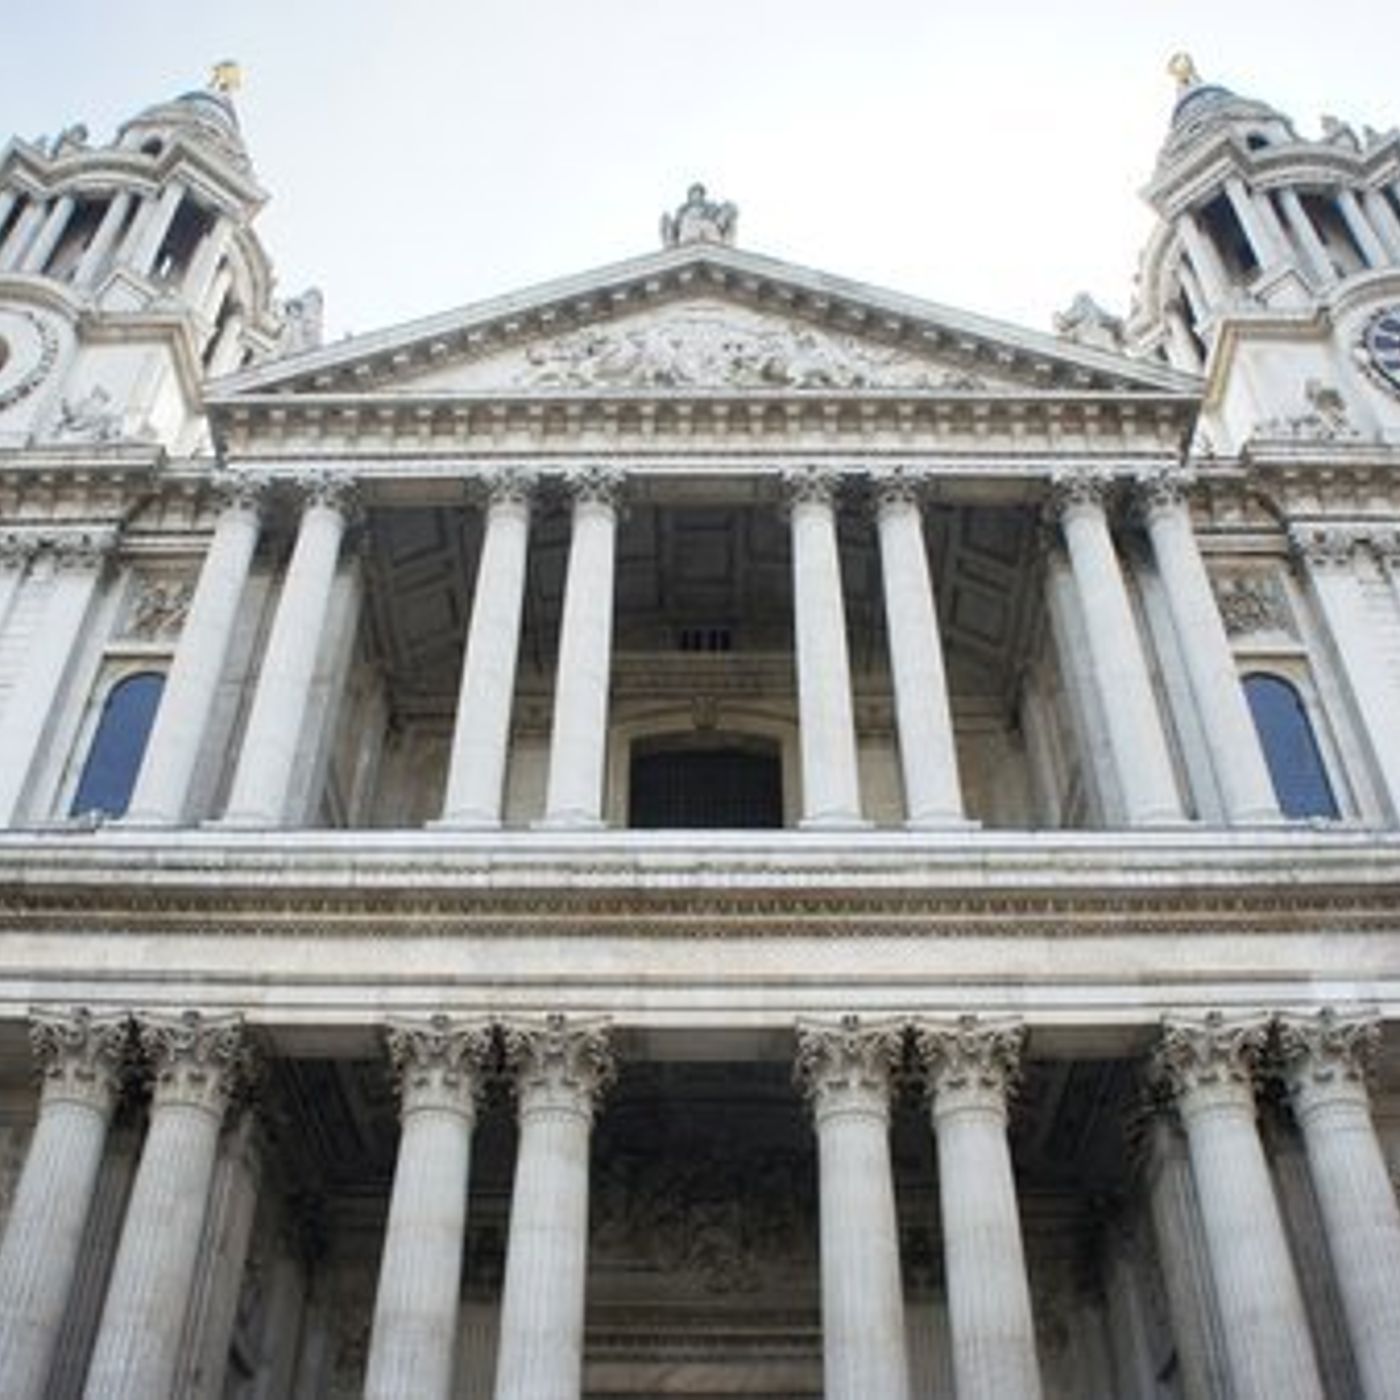 27: The Story Behind the Architecture and Construction of St. Paul's Cathedral and Sir Christopher Wren